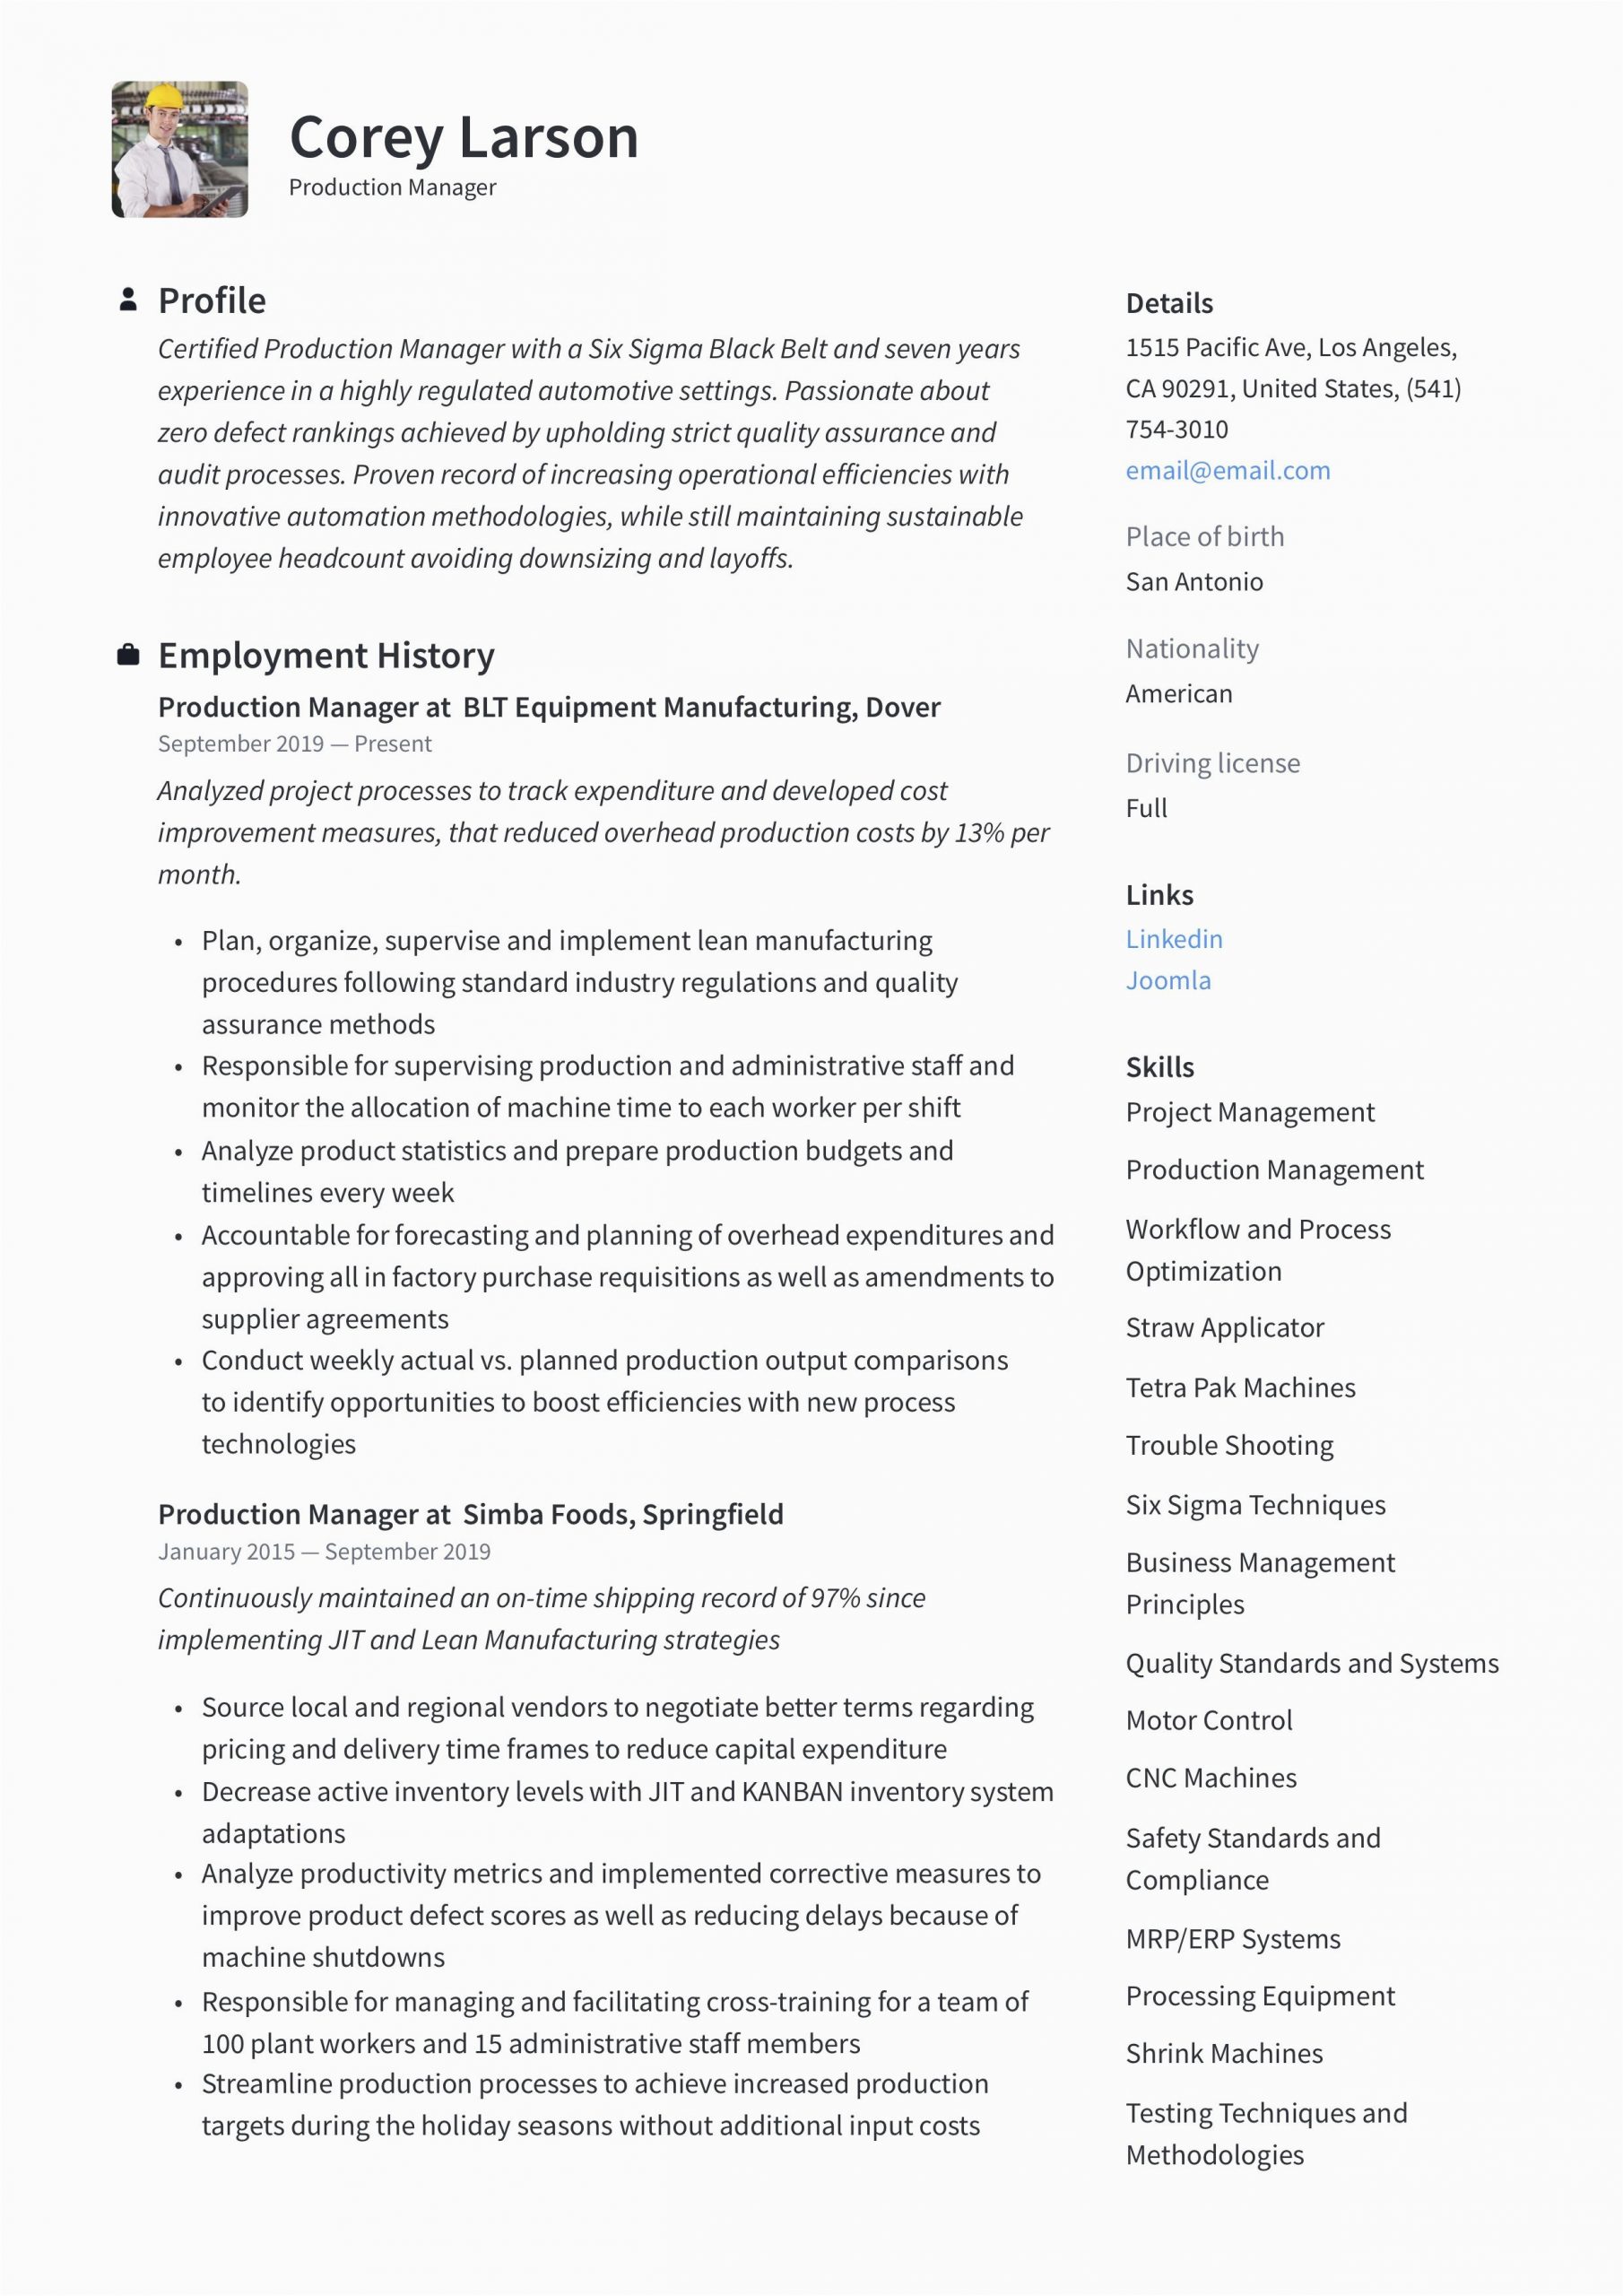 Leeds School Of Business Resume Template Production Manager Resume & Writing Guide In 2020